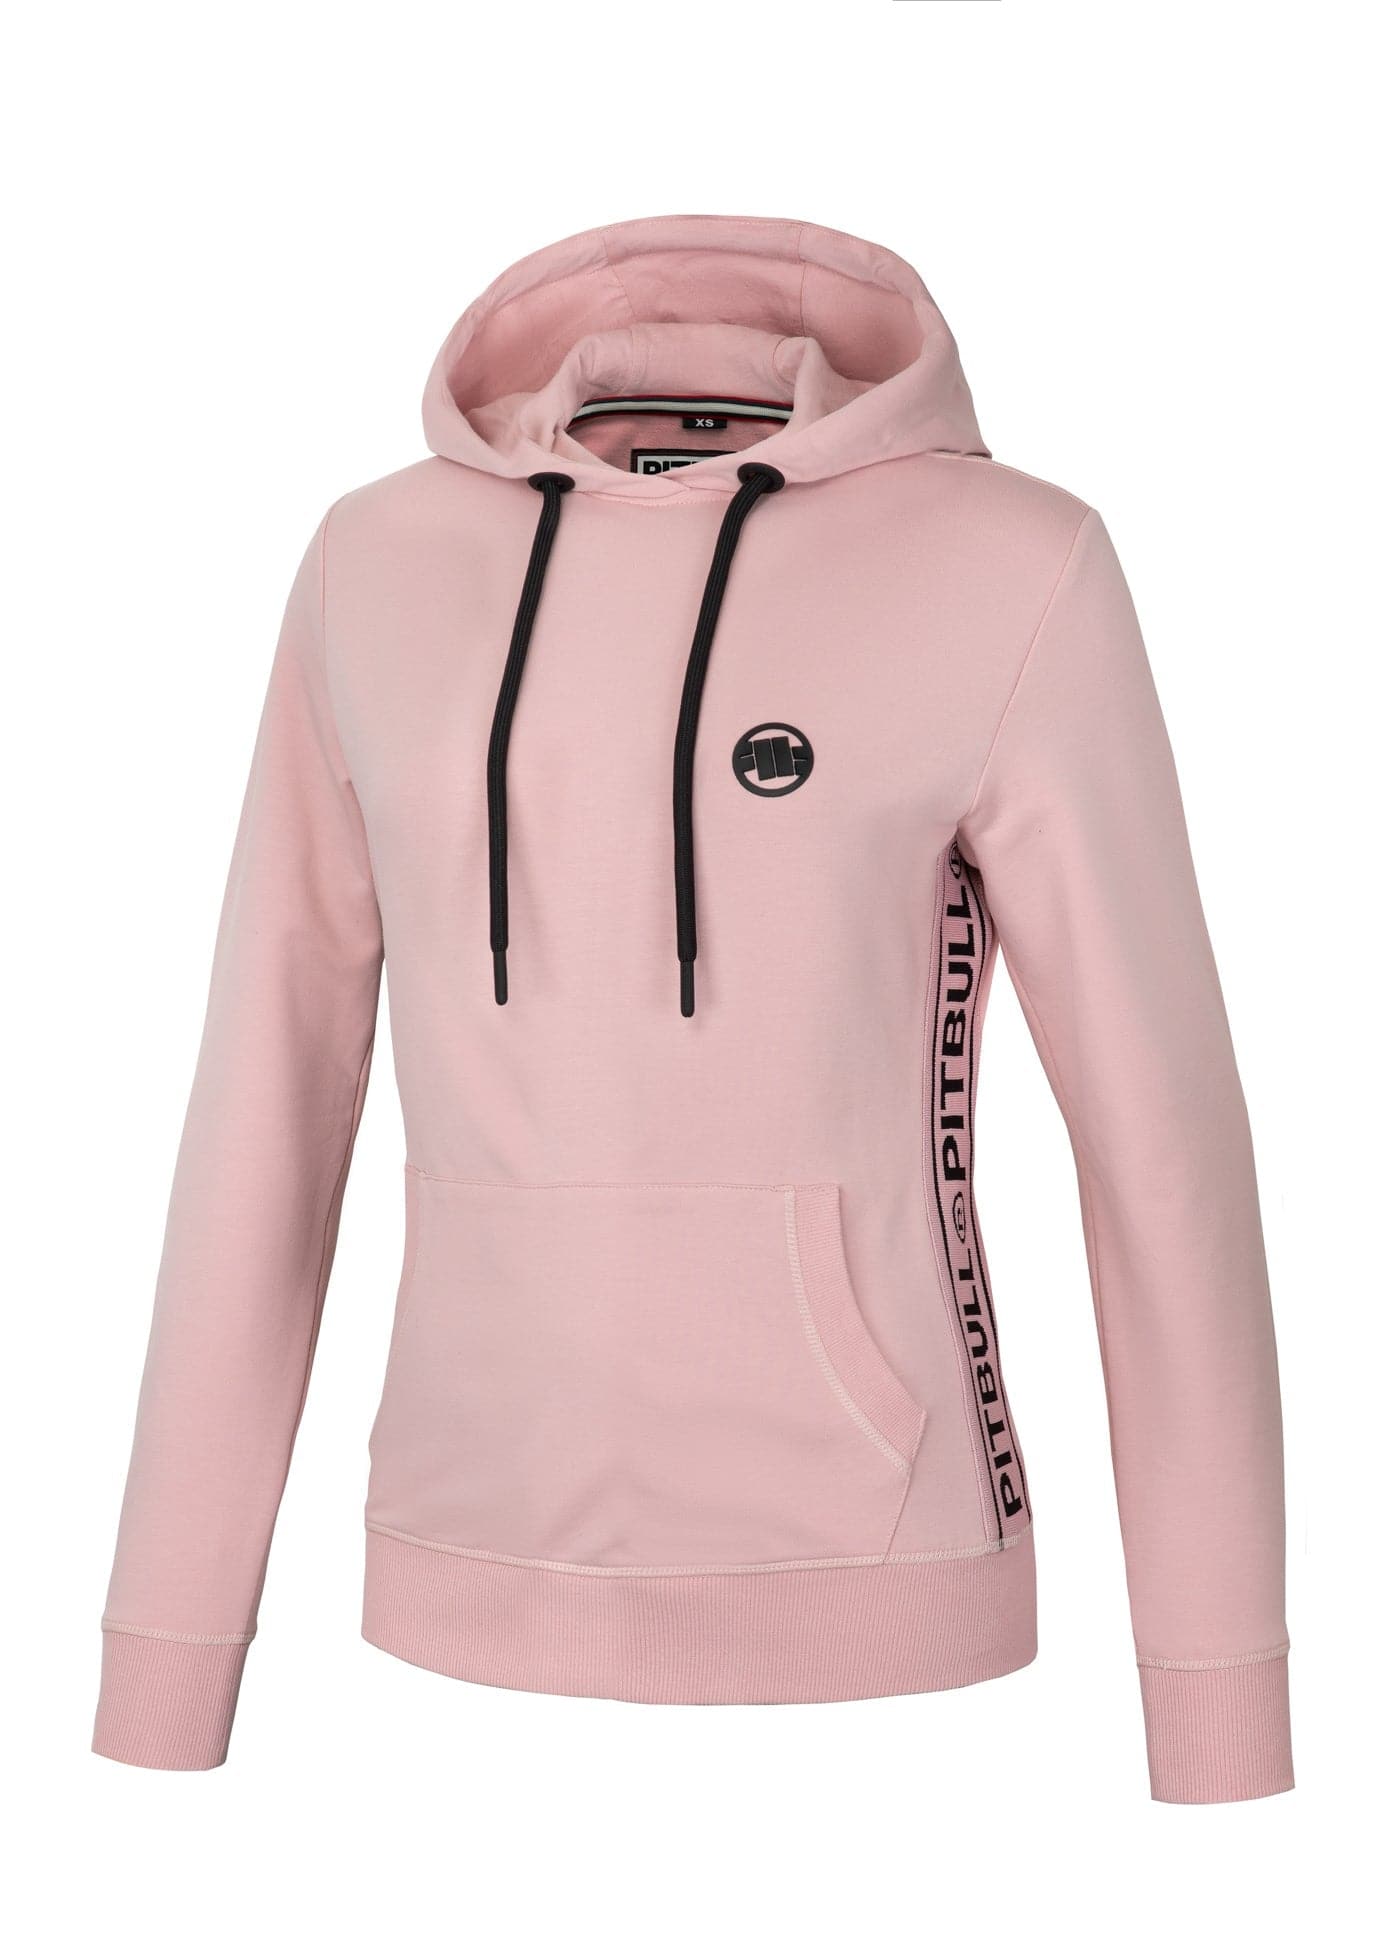 LA CANADA French Terry Pink Hoodie